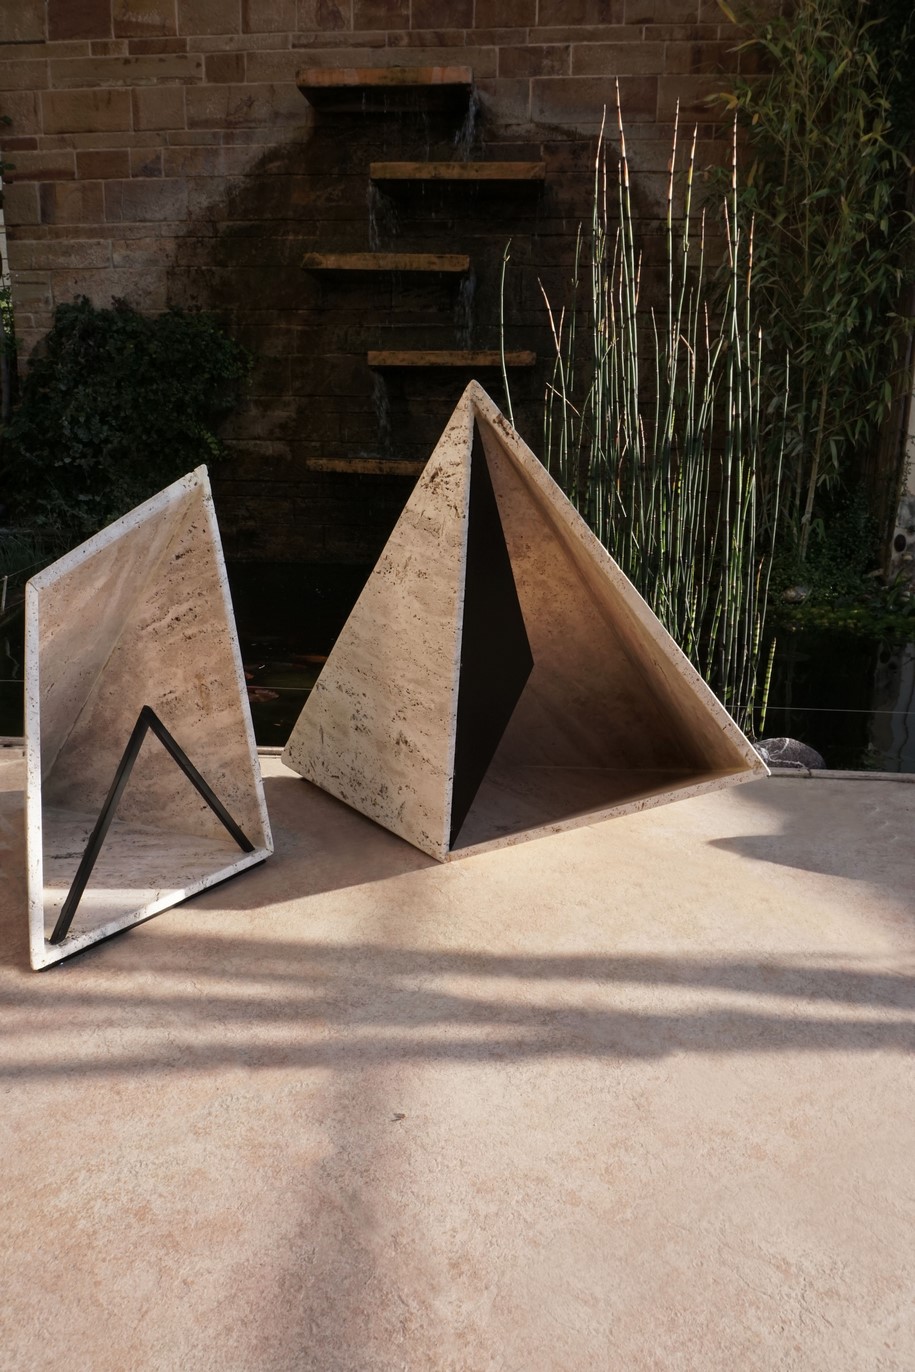 Archisearch Greek Design Duo Okapi Wins 2nd Place in Darc Awards Decorative Outdoors Lamp